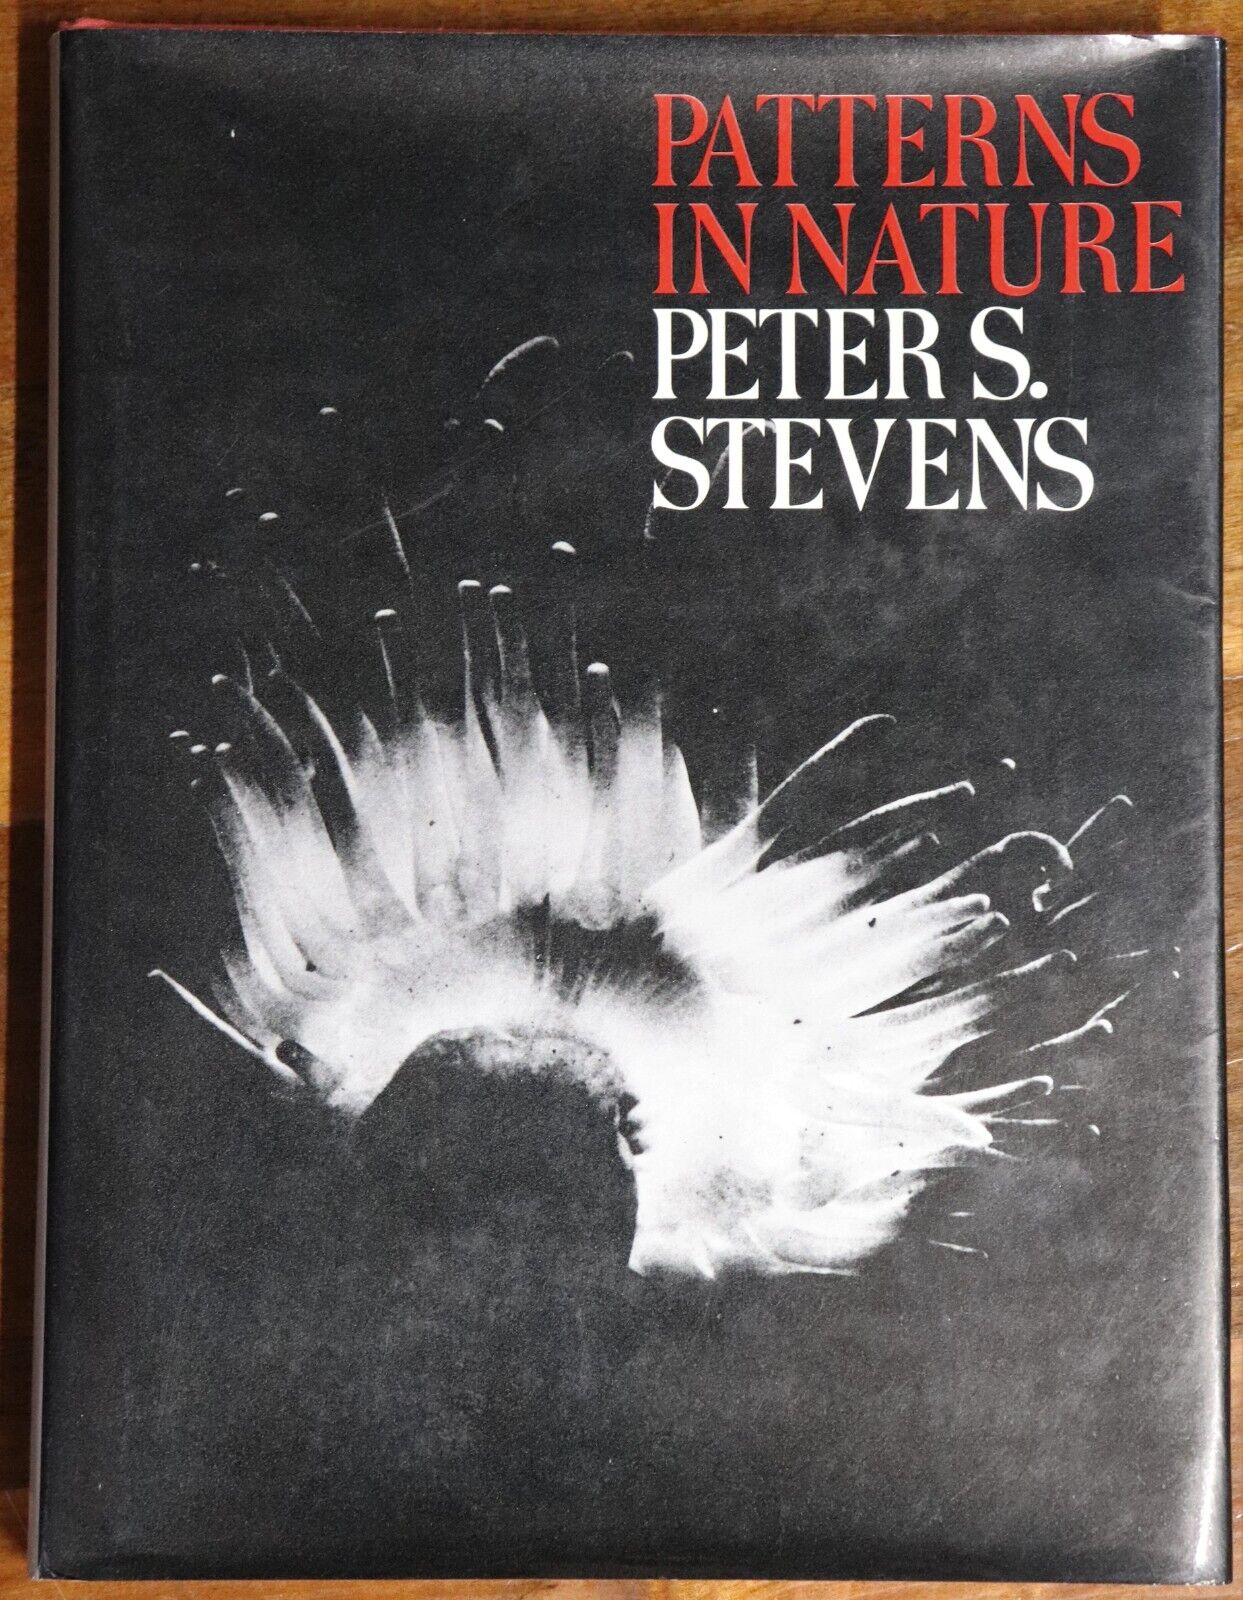 Patterns In Nature by Peter S Stevens - 1974 - 1st Edition Art & Science Book